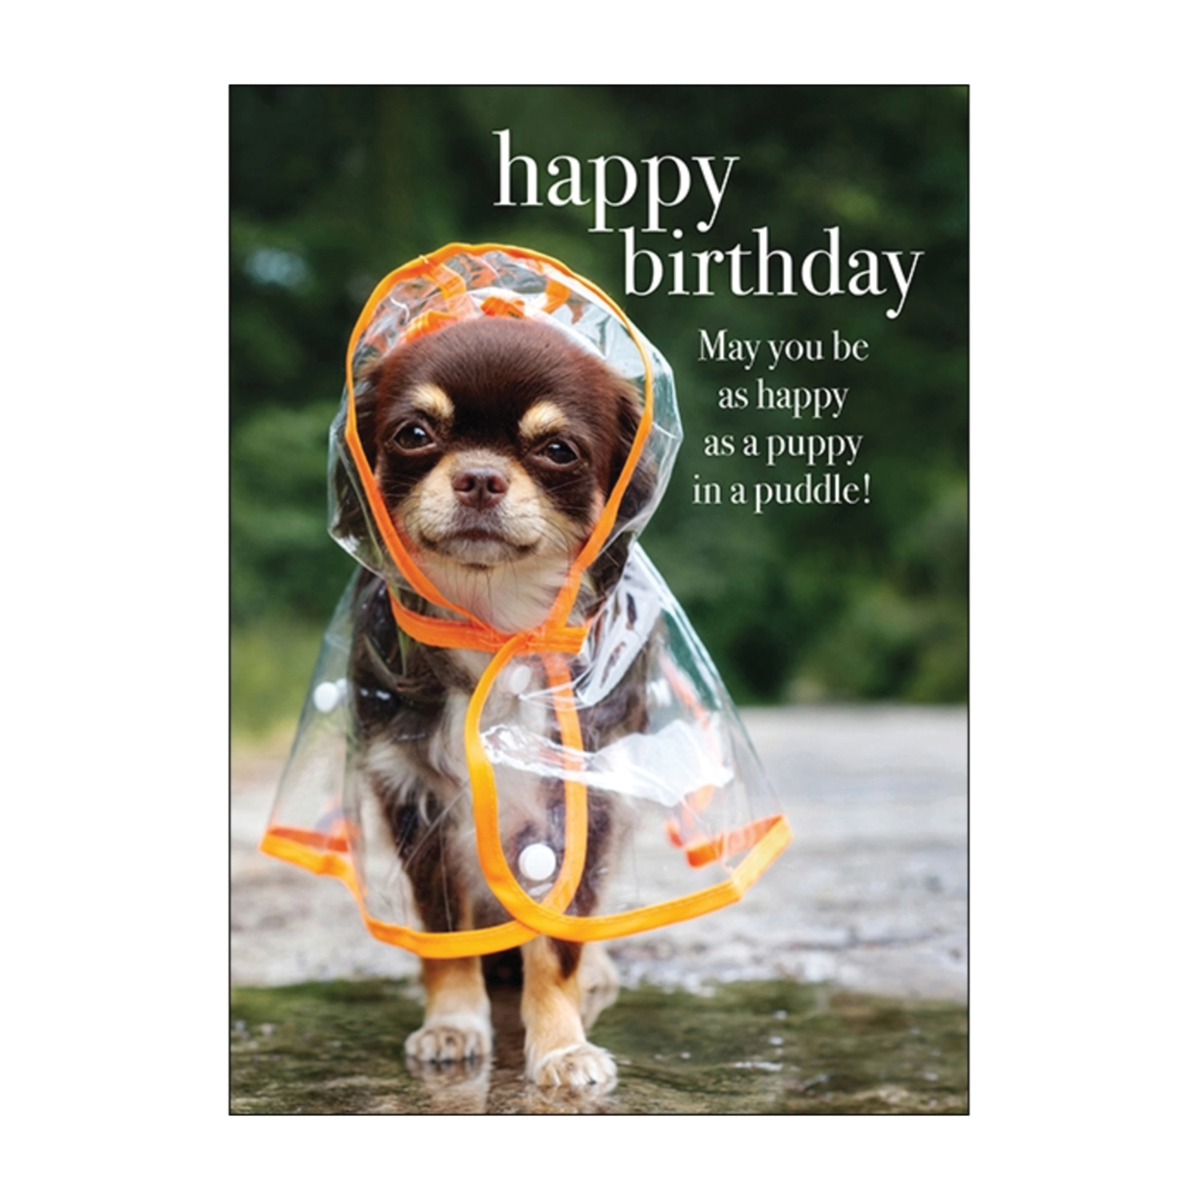 Puppy in a Puddle Birthday Card, Image 1